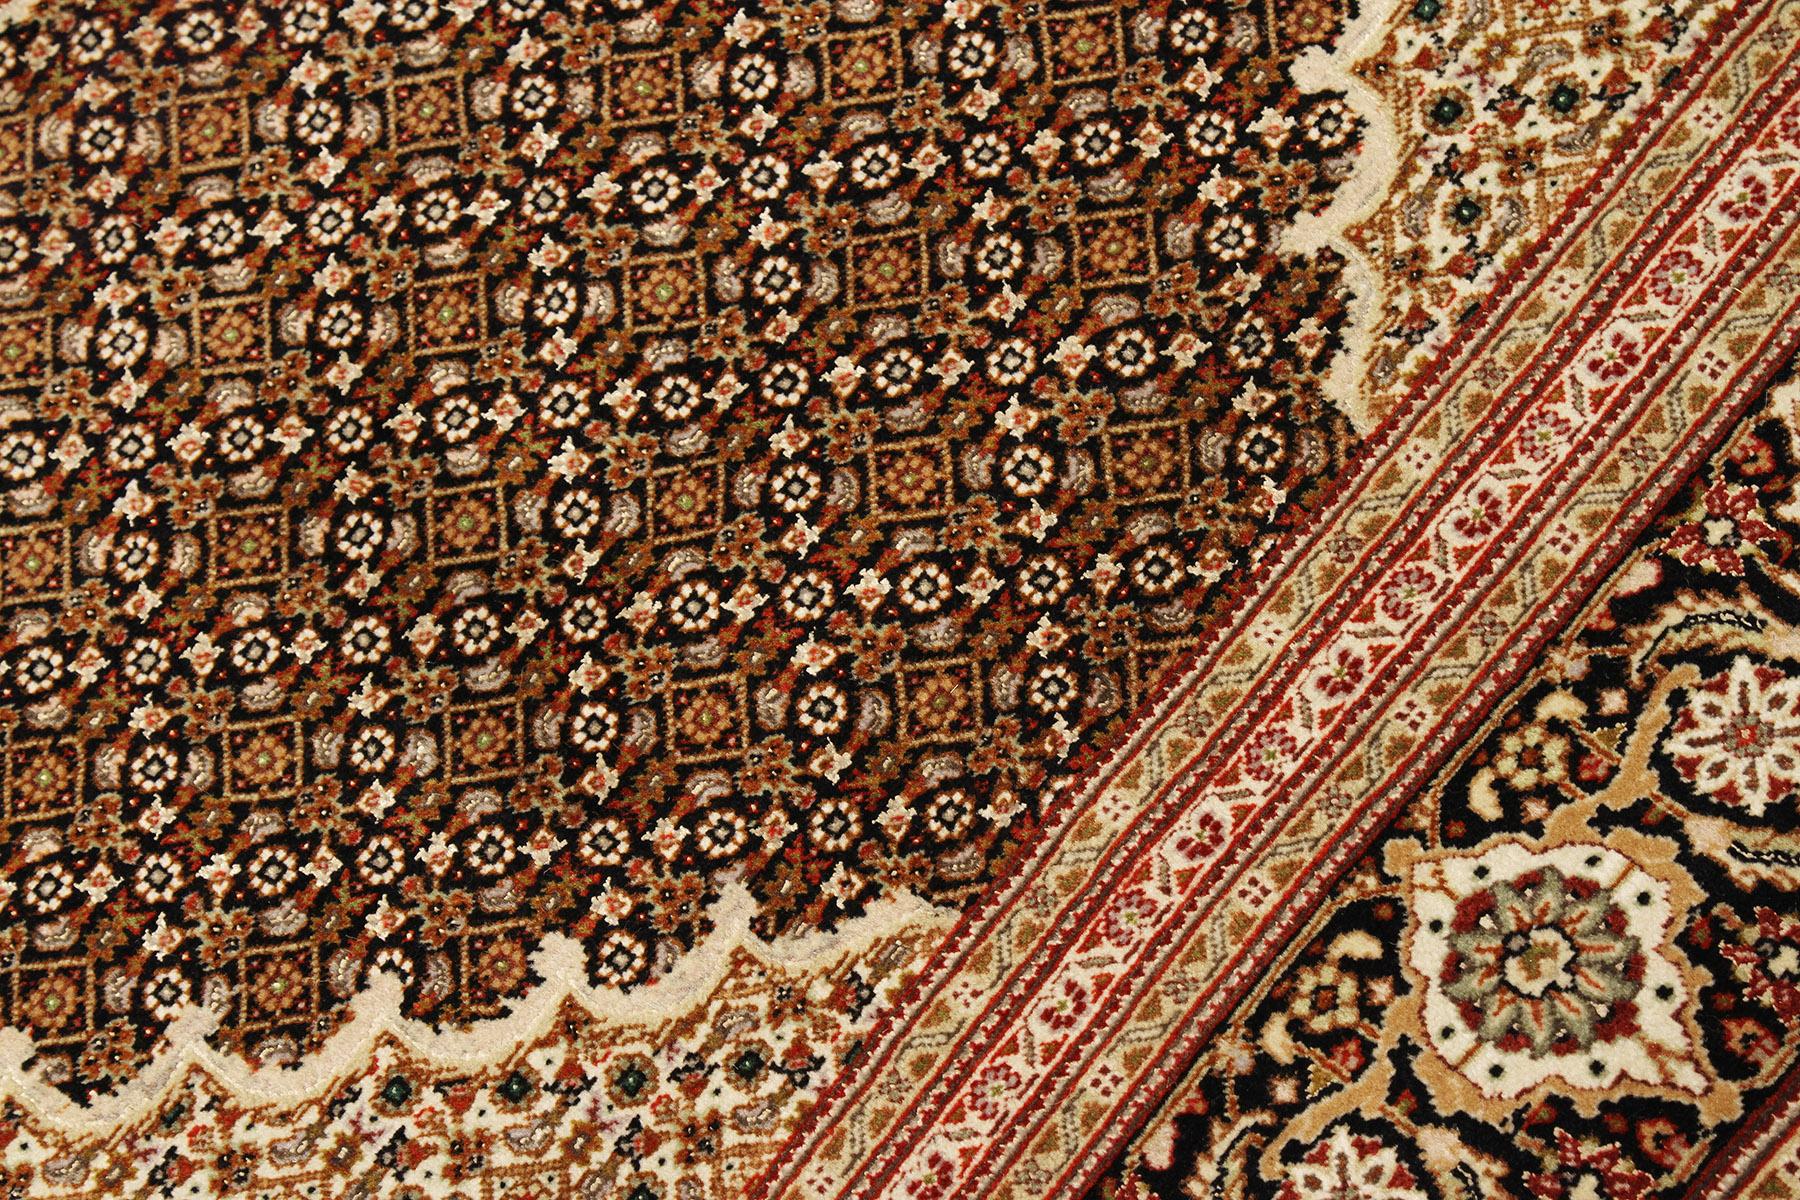 Contemporary Persian Tabriz Rug with White & Brown Flower Motifs on Black Field In New Condition For Sale In Dallas, TX